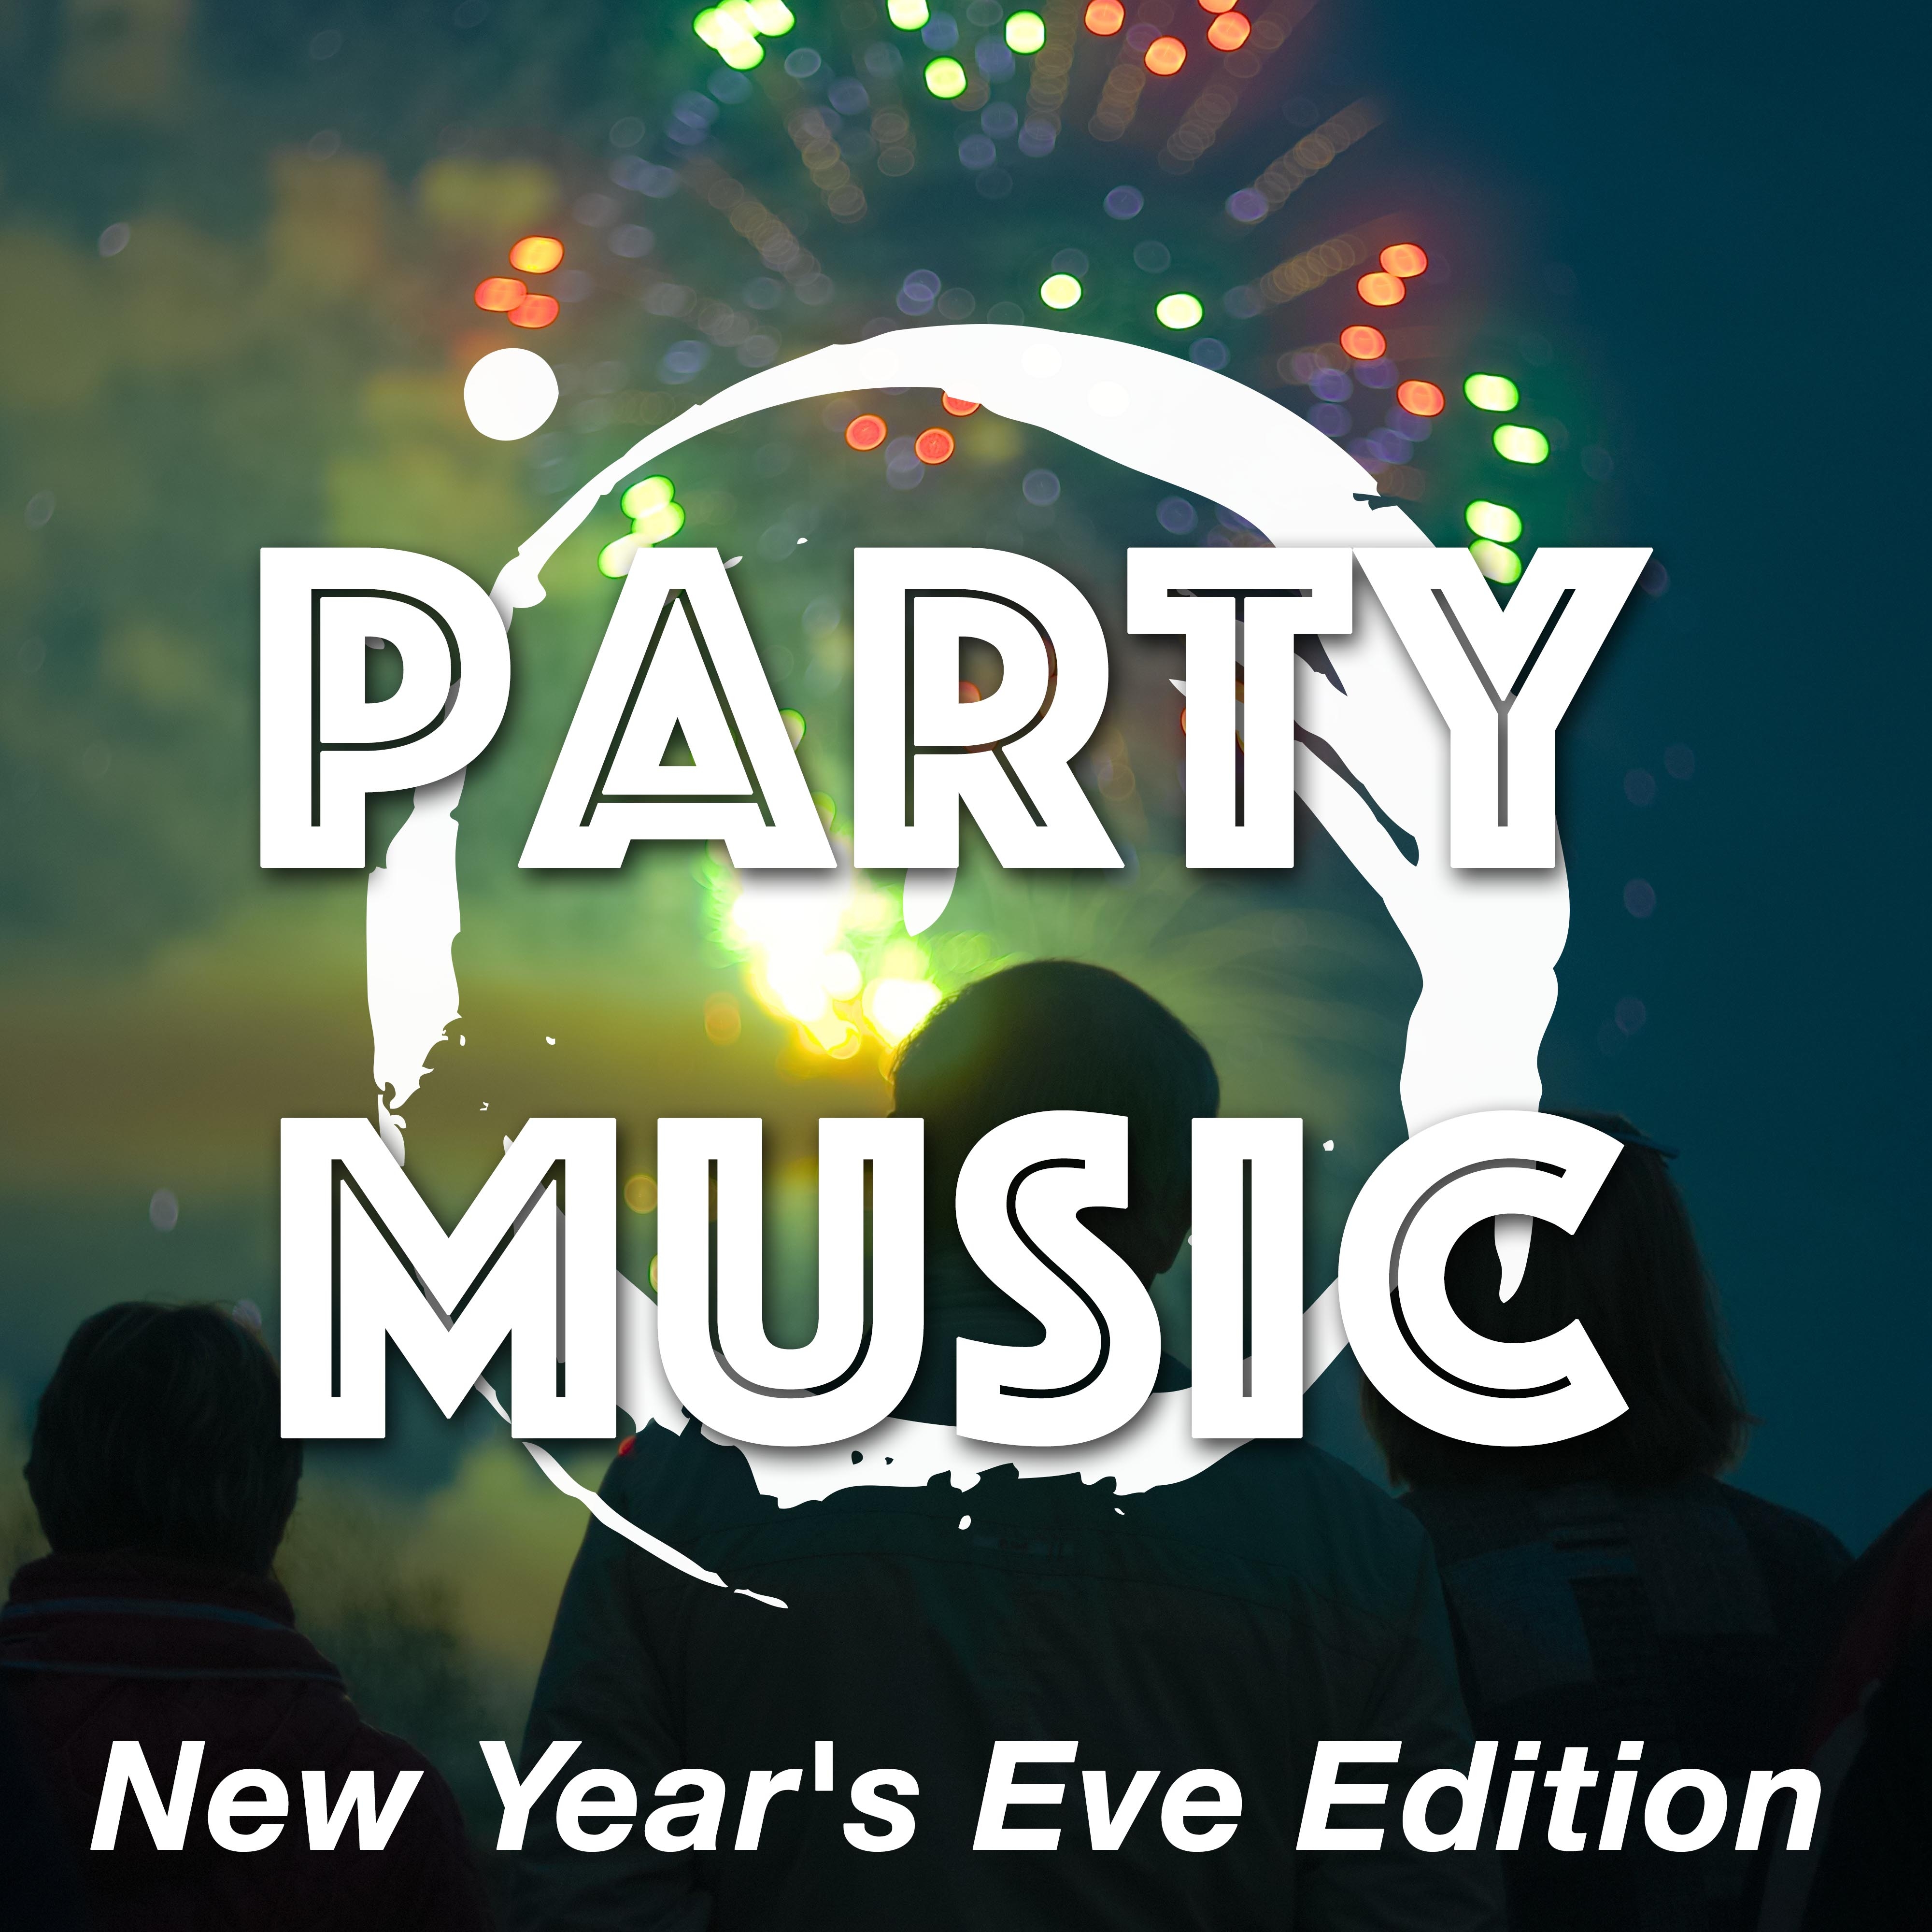 Party Music, New Year's Eve Edition - Your Mix of Tropical House Music, Spanish, Latino and Salsa Beats to Have An Amazing Partying Time at New Year's Eve